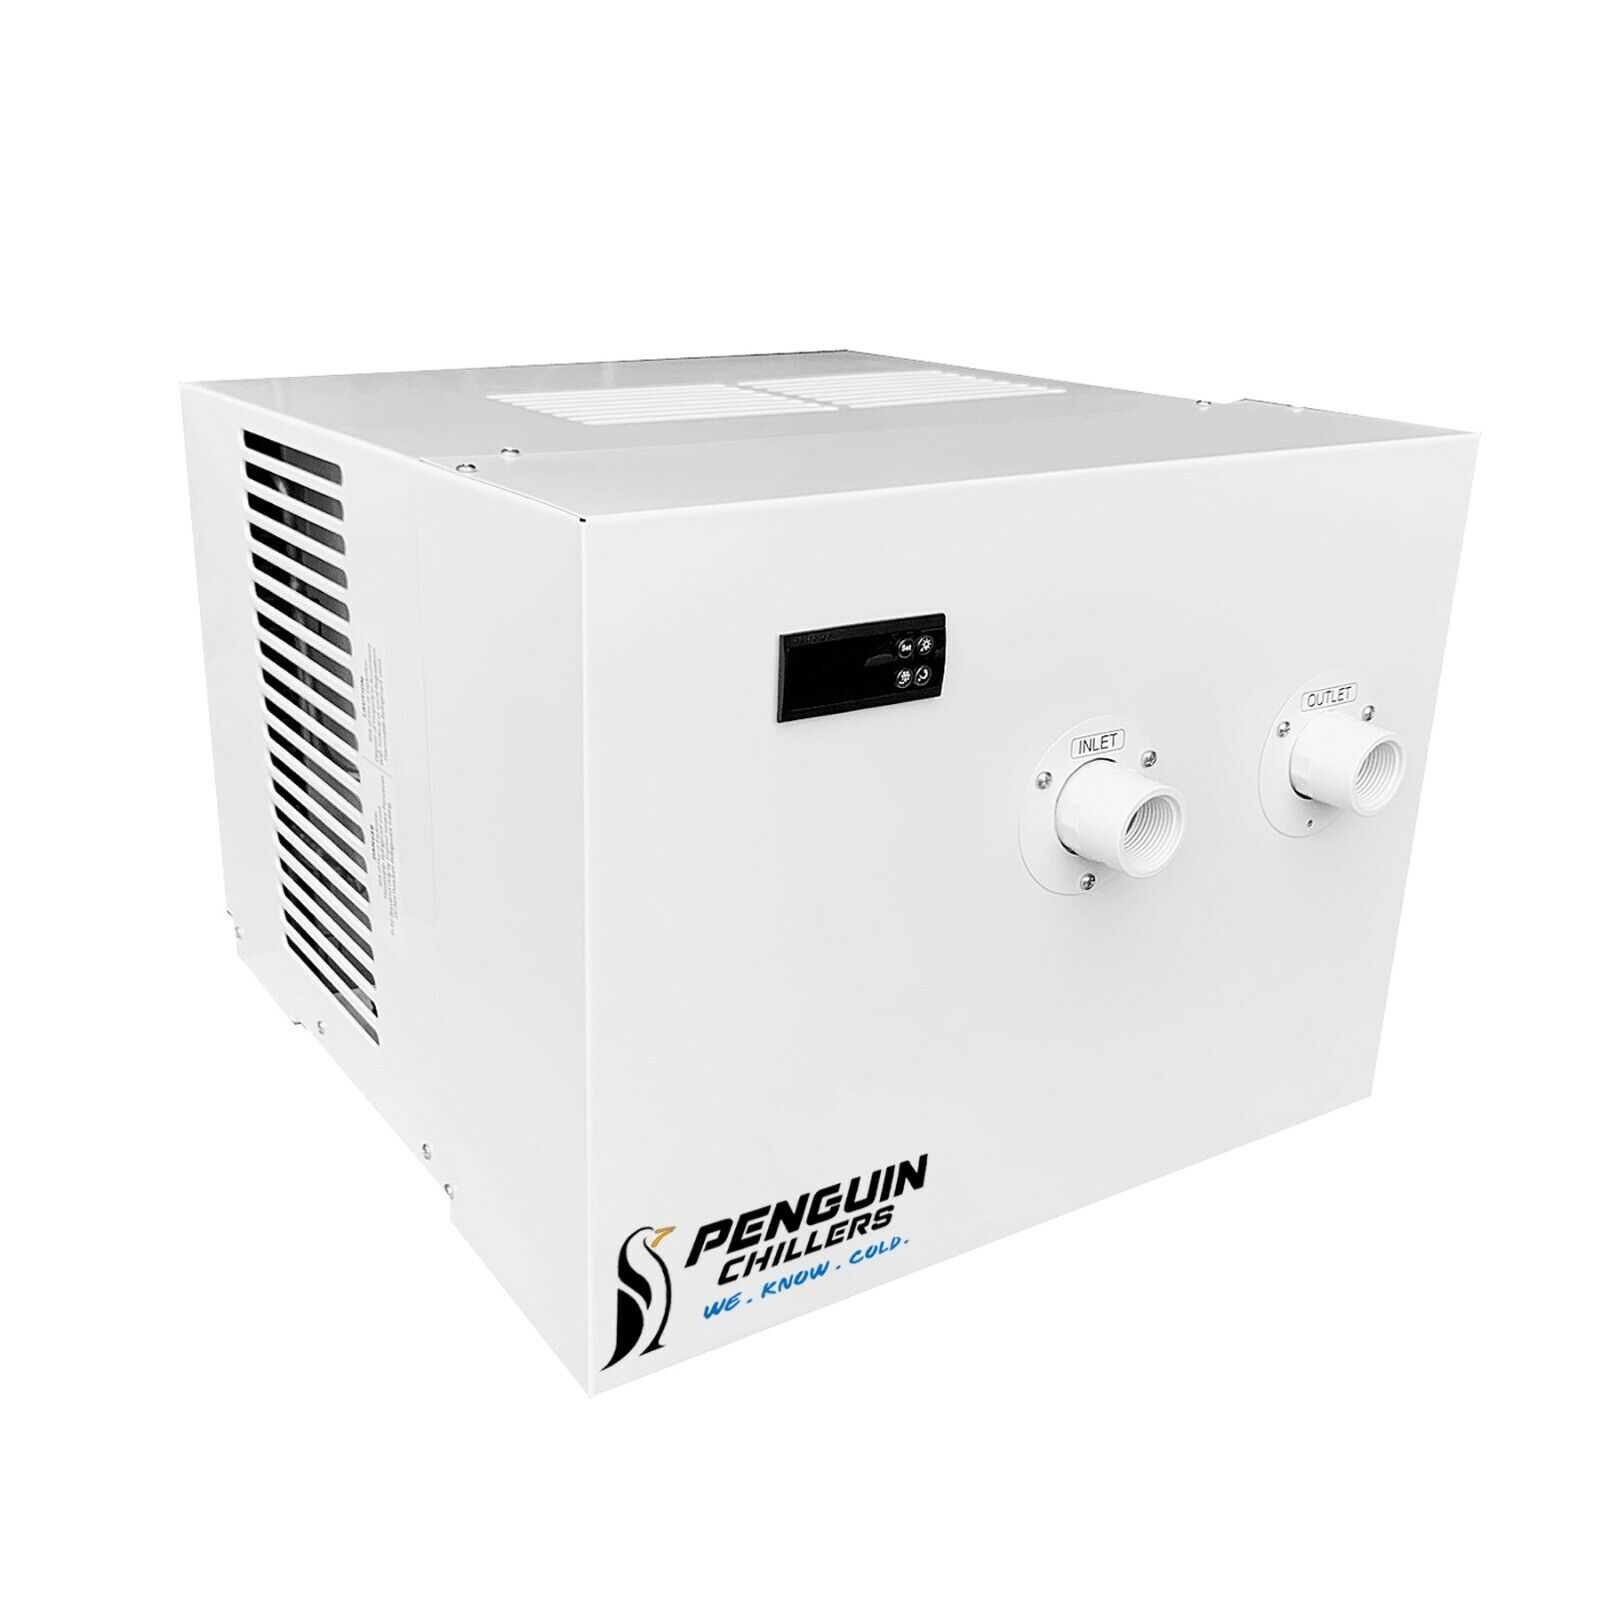 PENGUIN CHILLERS 1 HP WATER CHILLER, 10,000 BTU SALTWATER CORAL TANK, AQUAPONICS